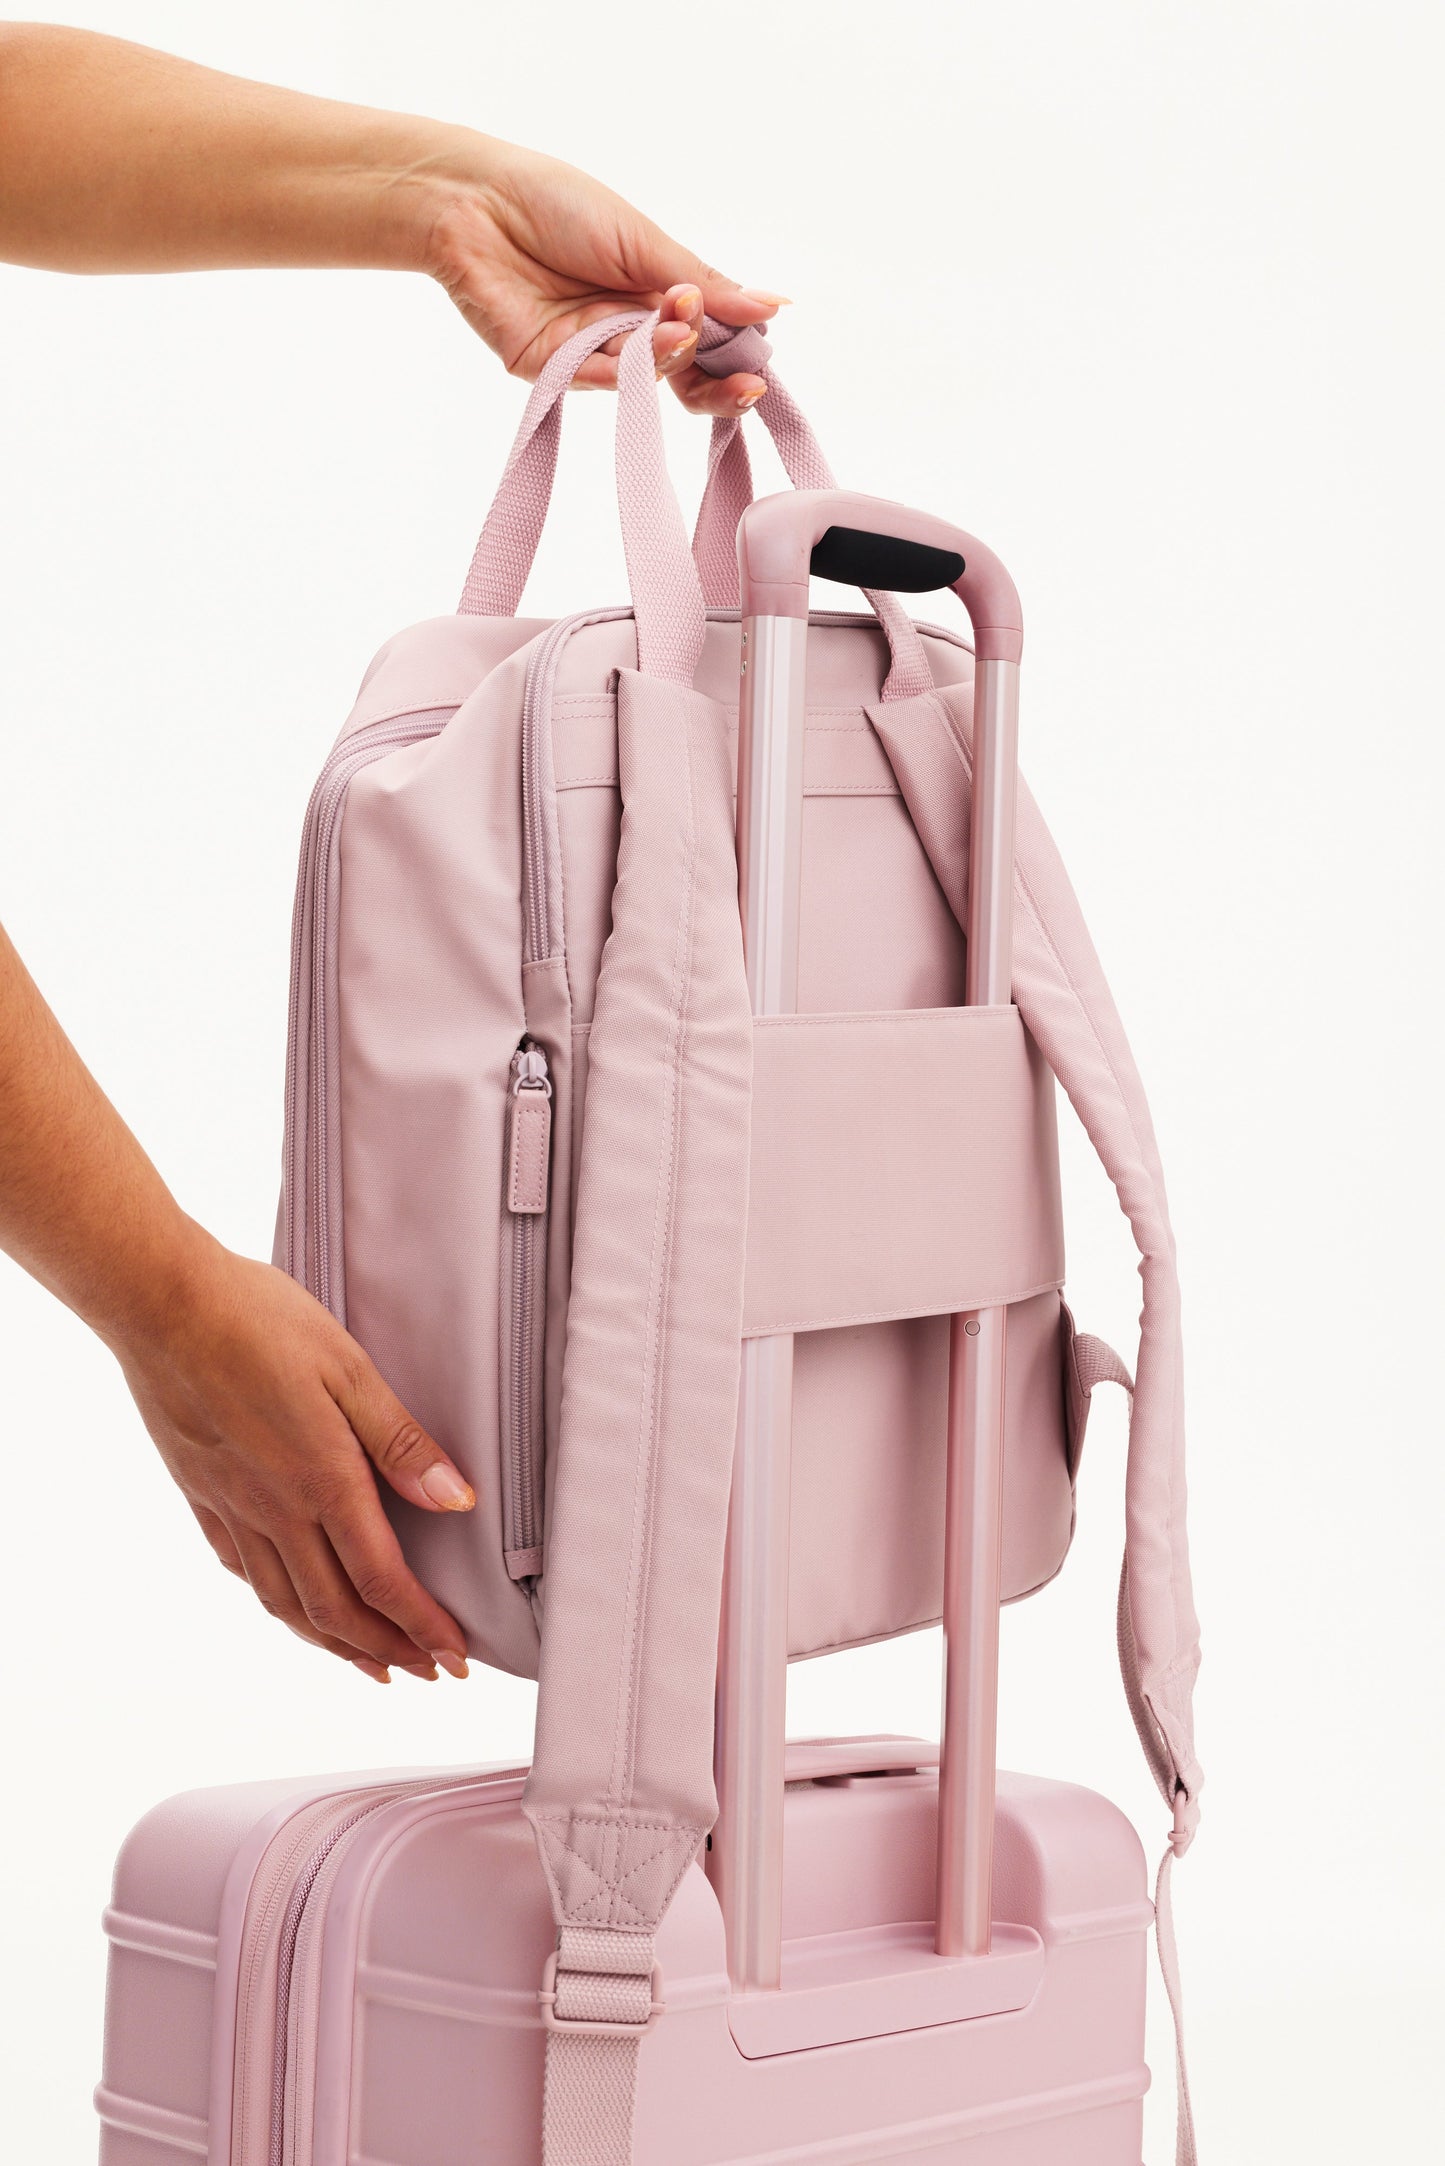 The Expandable Backpack in Atlas Pink